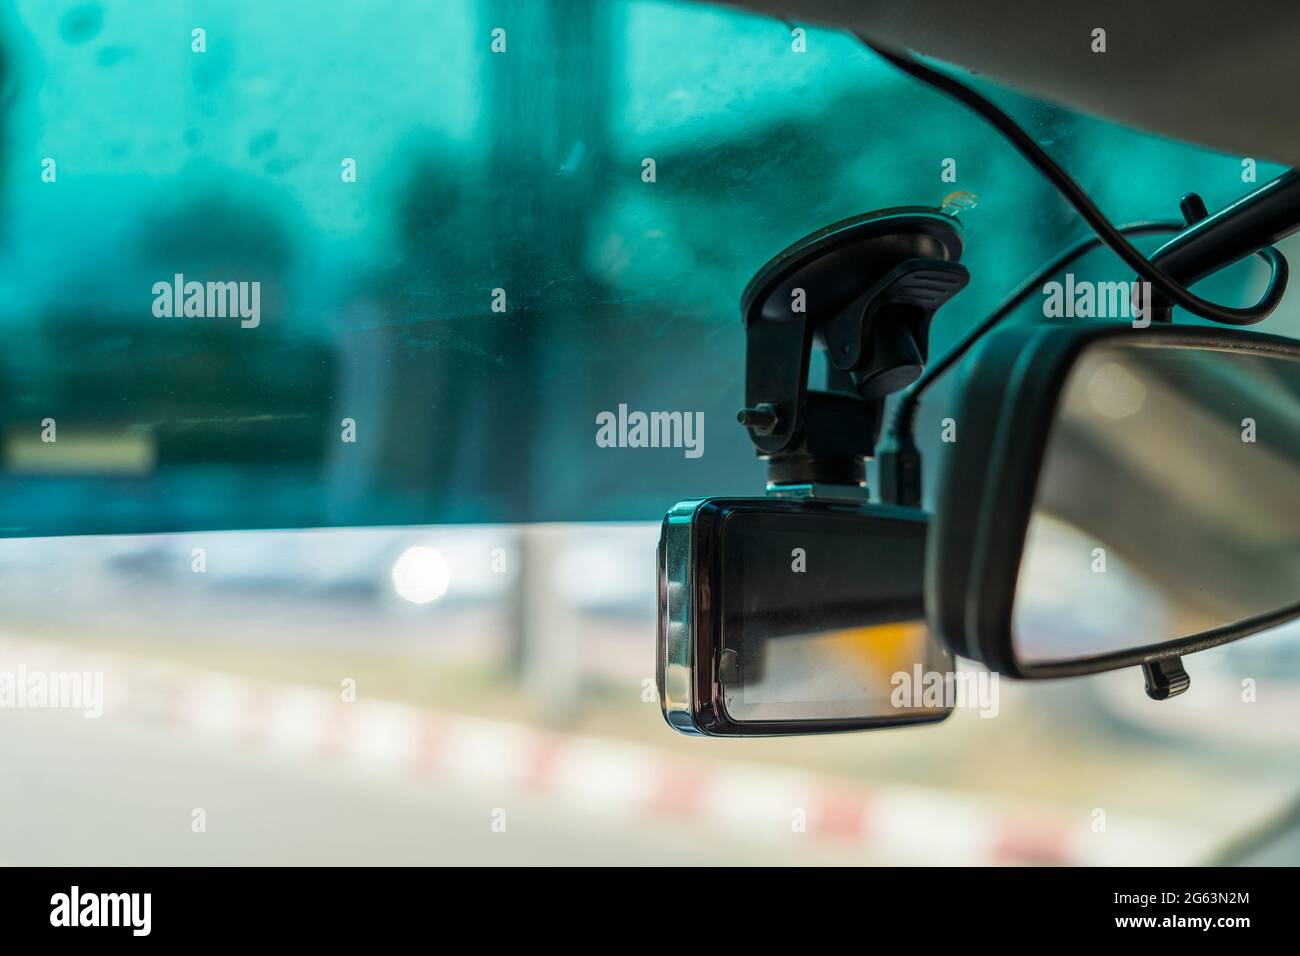 https://c8.alamy.com/comp/2G63N2M/video-recorder-next-to-a-rear-view-mirror-cctv-car-camera-for-safety-on-the-road-accident-2G63N2M.jpg